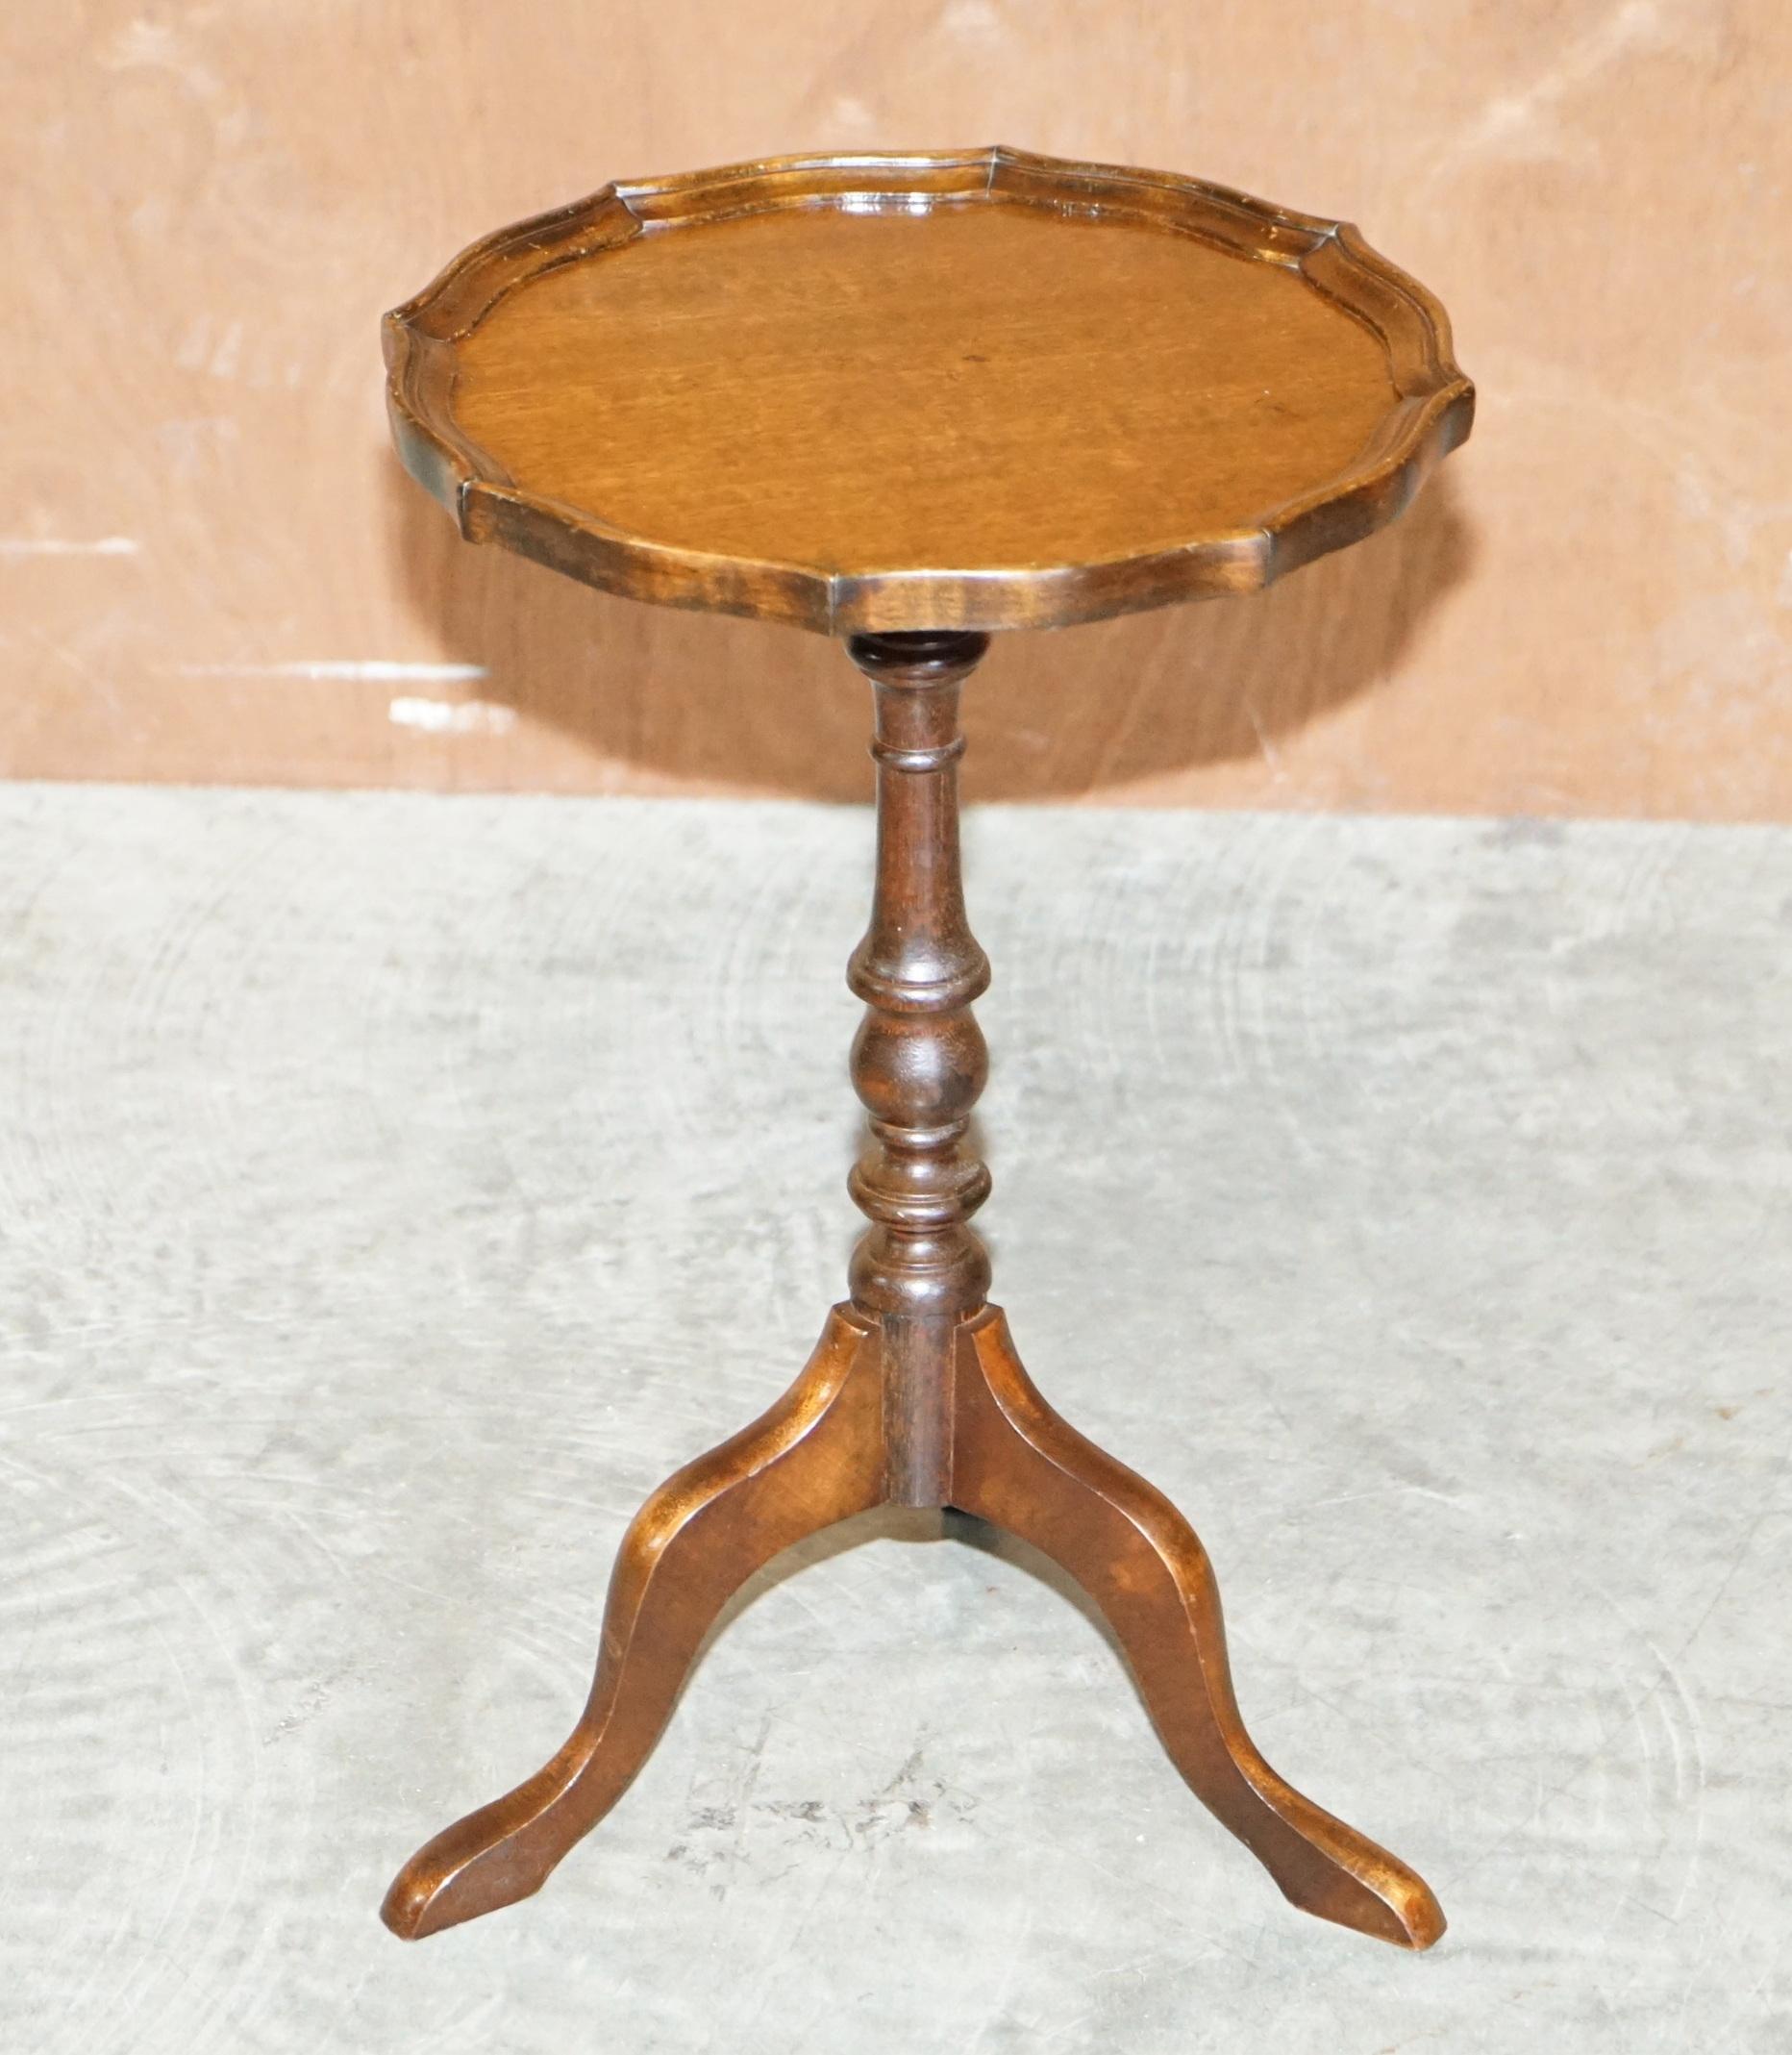 We are delighted to offer this lovely vintage flamed Mahogany Pie crust edge lamp or side table.

A good-looking well-made tripod table in good, we have cleaned waxed and polished it from top to bottom, there will be normal patina marks from